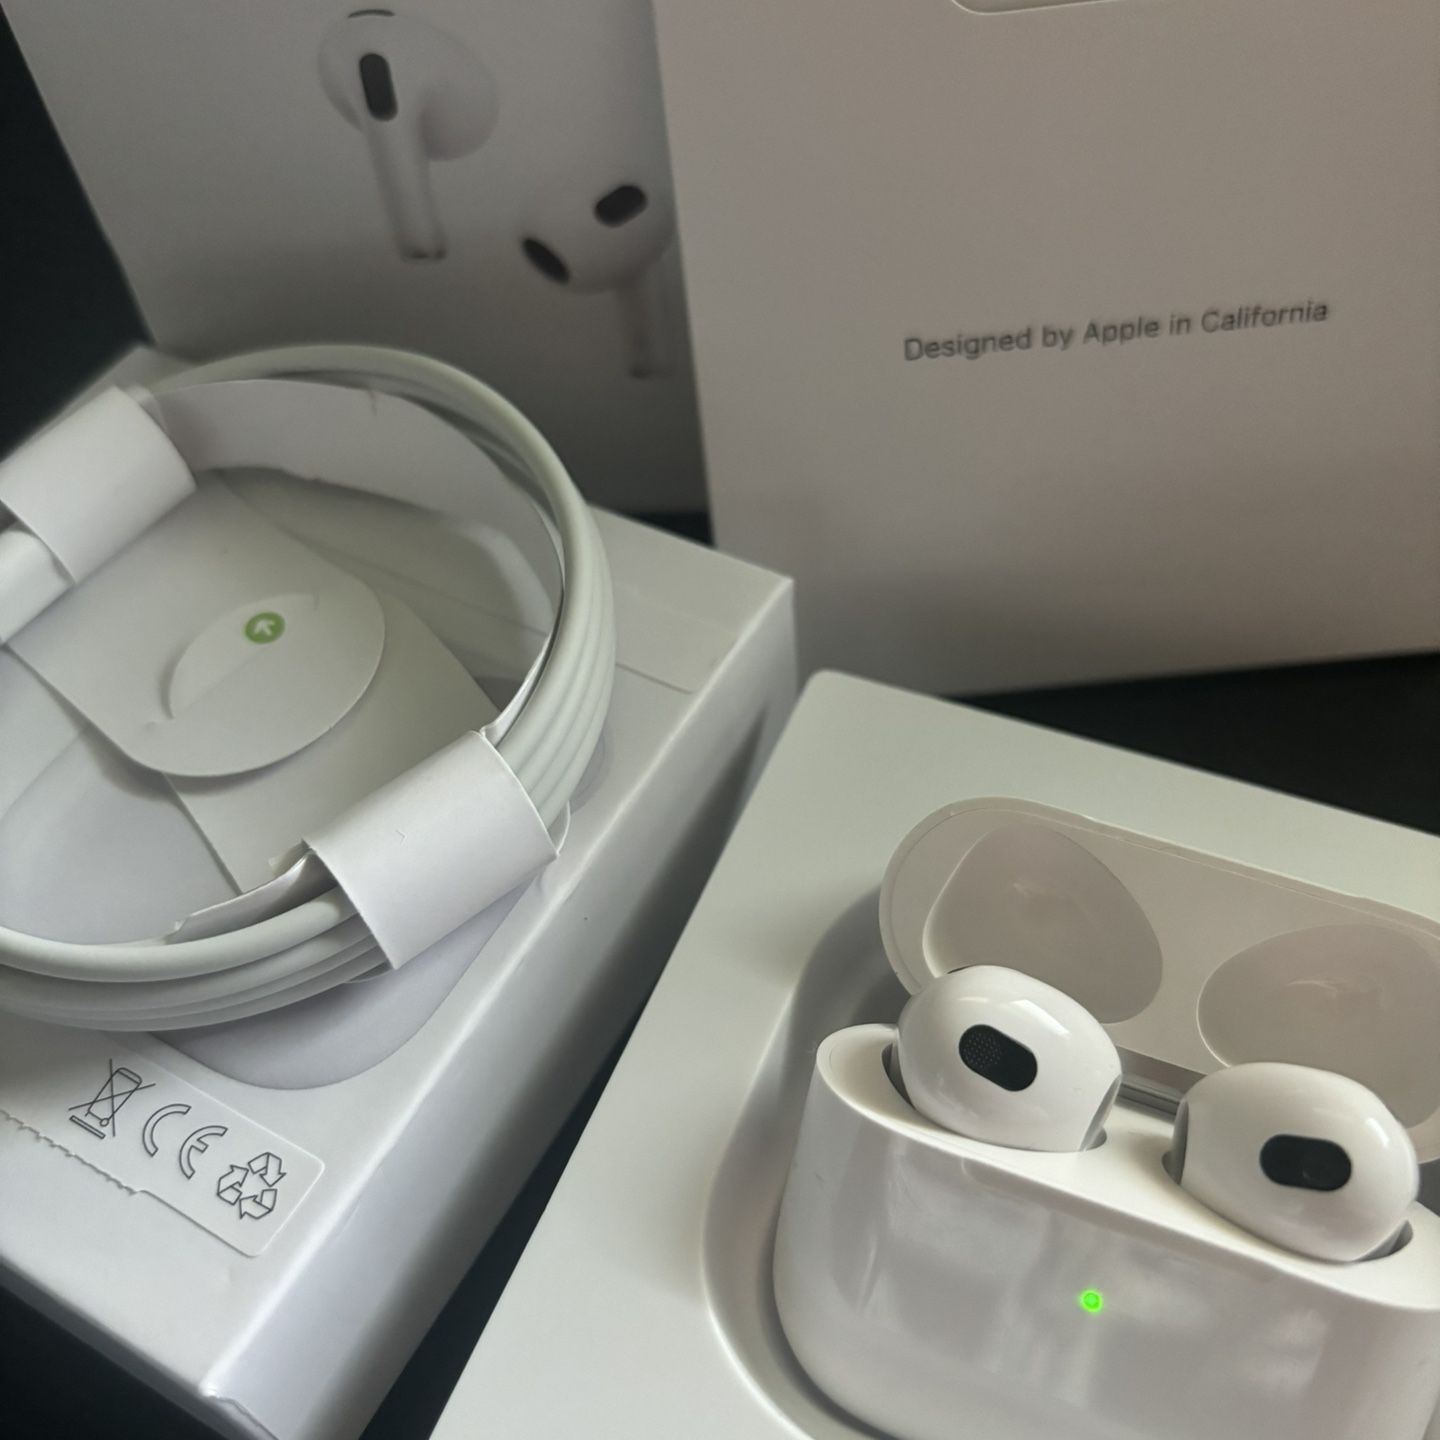 3rd Generation AirPods With Active (AppleCare)